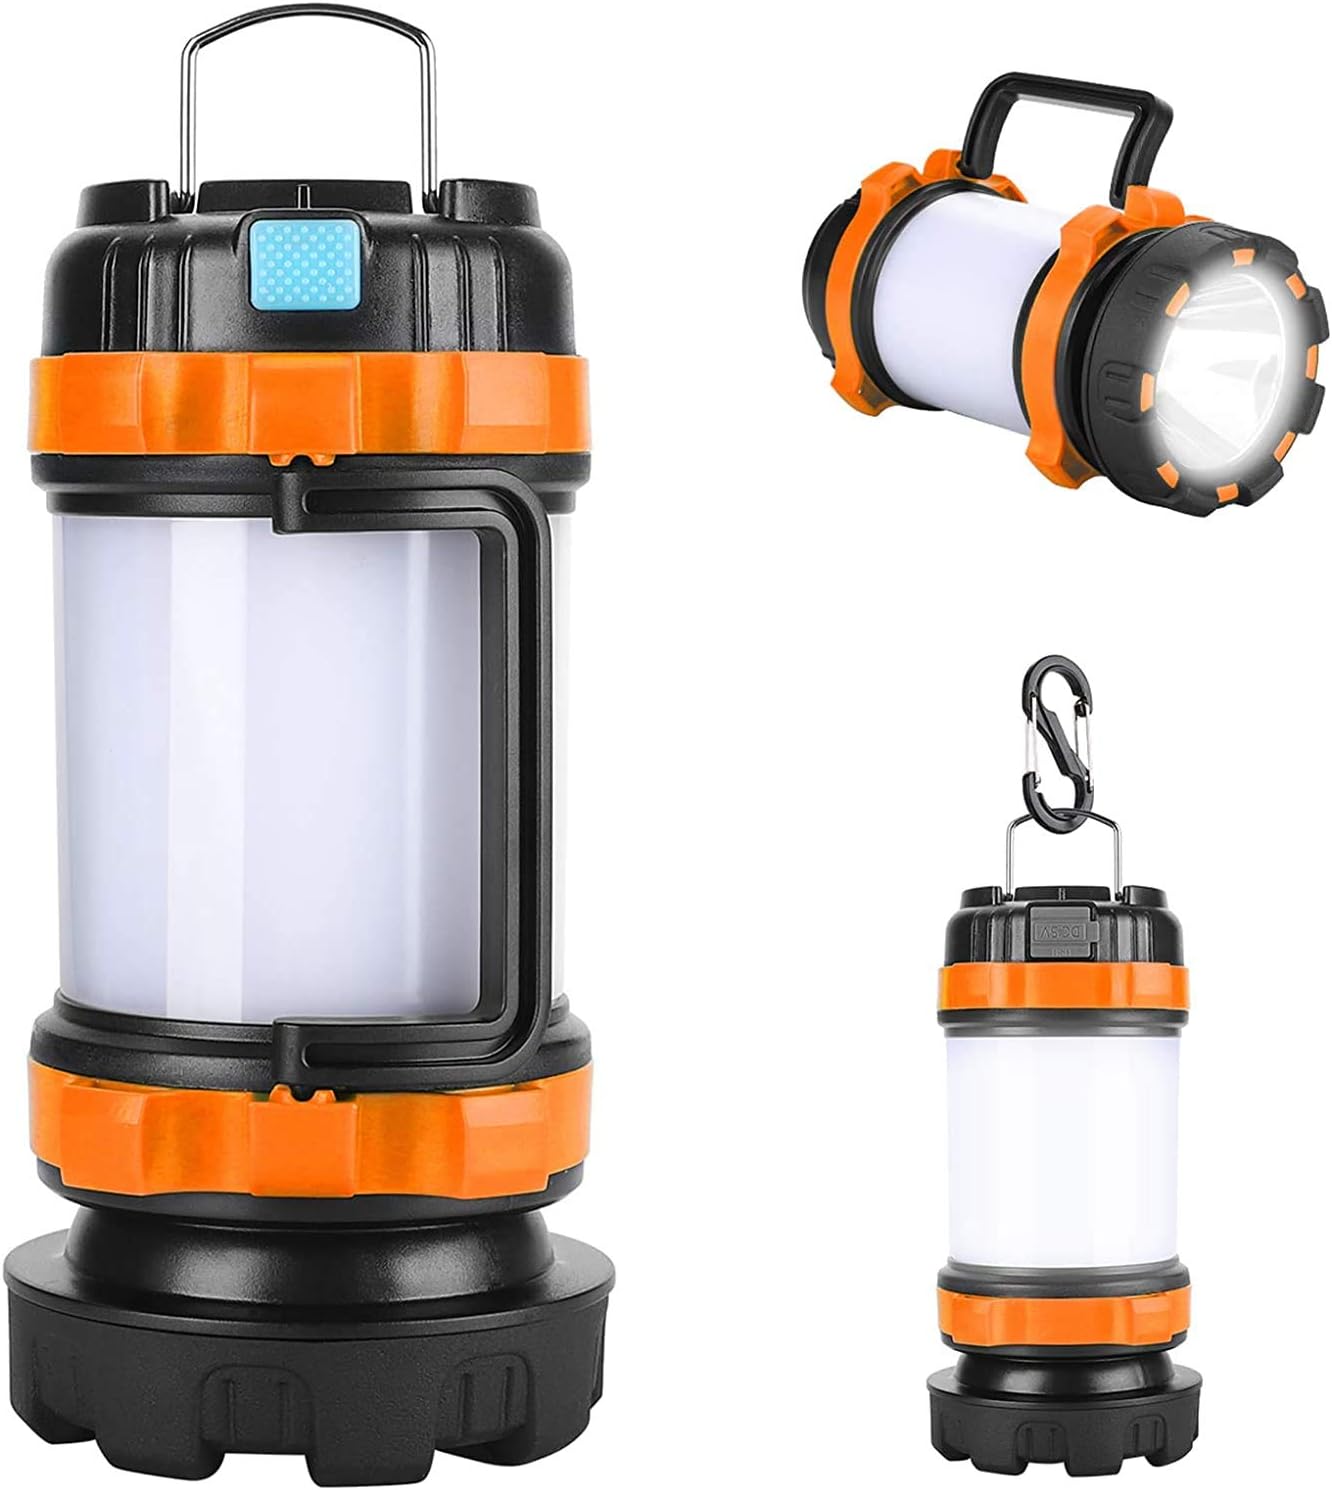 USB Light Bulb Camping Lantern Portable Hanging for Camping Fishing Outdoor  AU